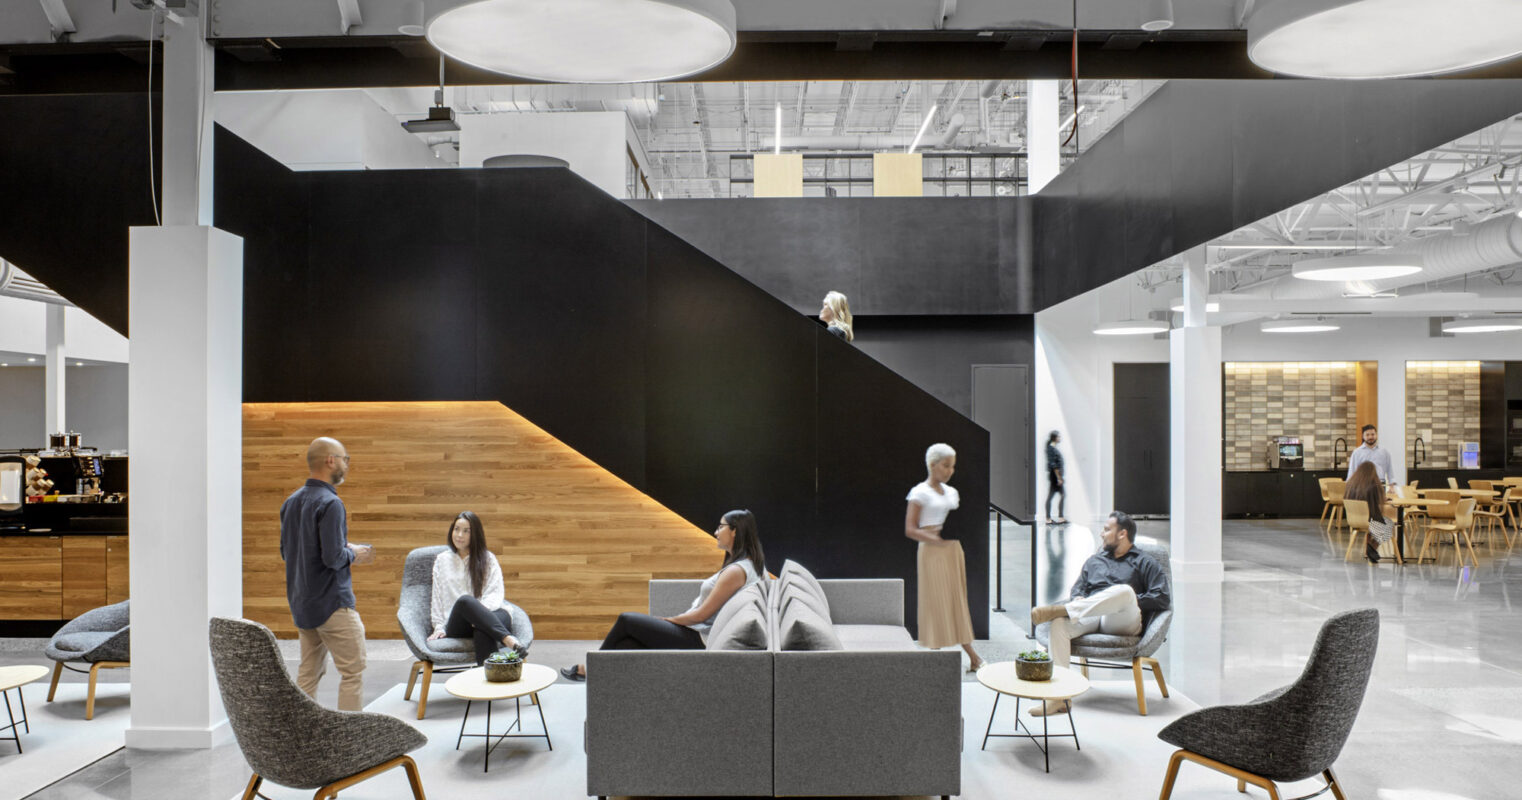 Modern office lounge with monochromatic color scheme, featuring a striking black staircase centerpiece and eclectic seating arrangements with Scandinavian-inspired chairs, promoting collaborative and individual relaxation spaces.